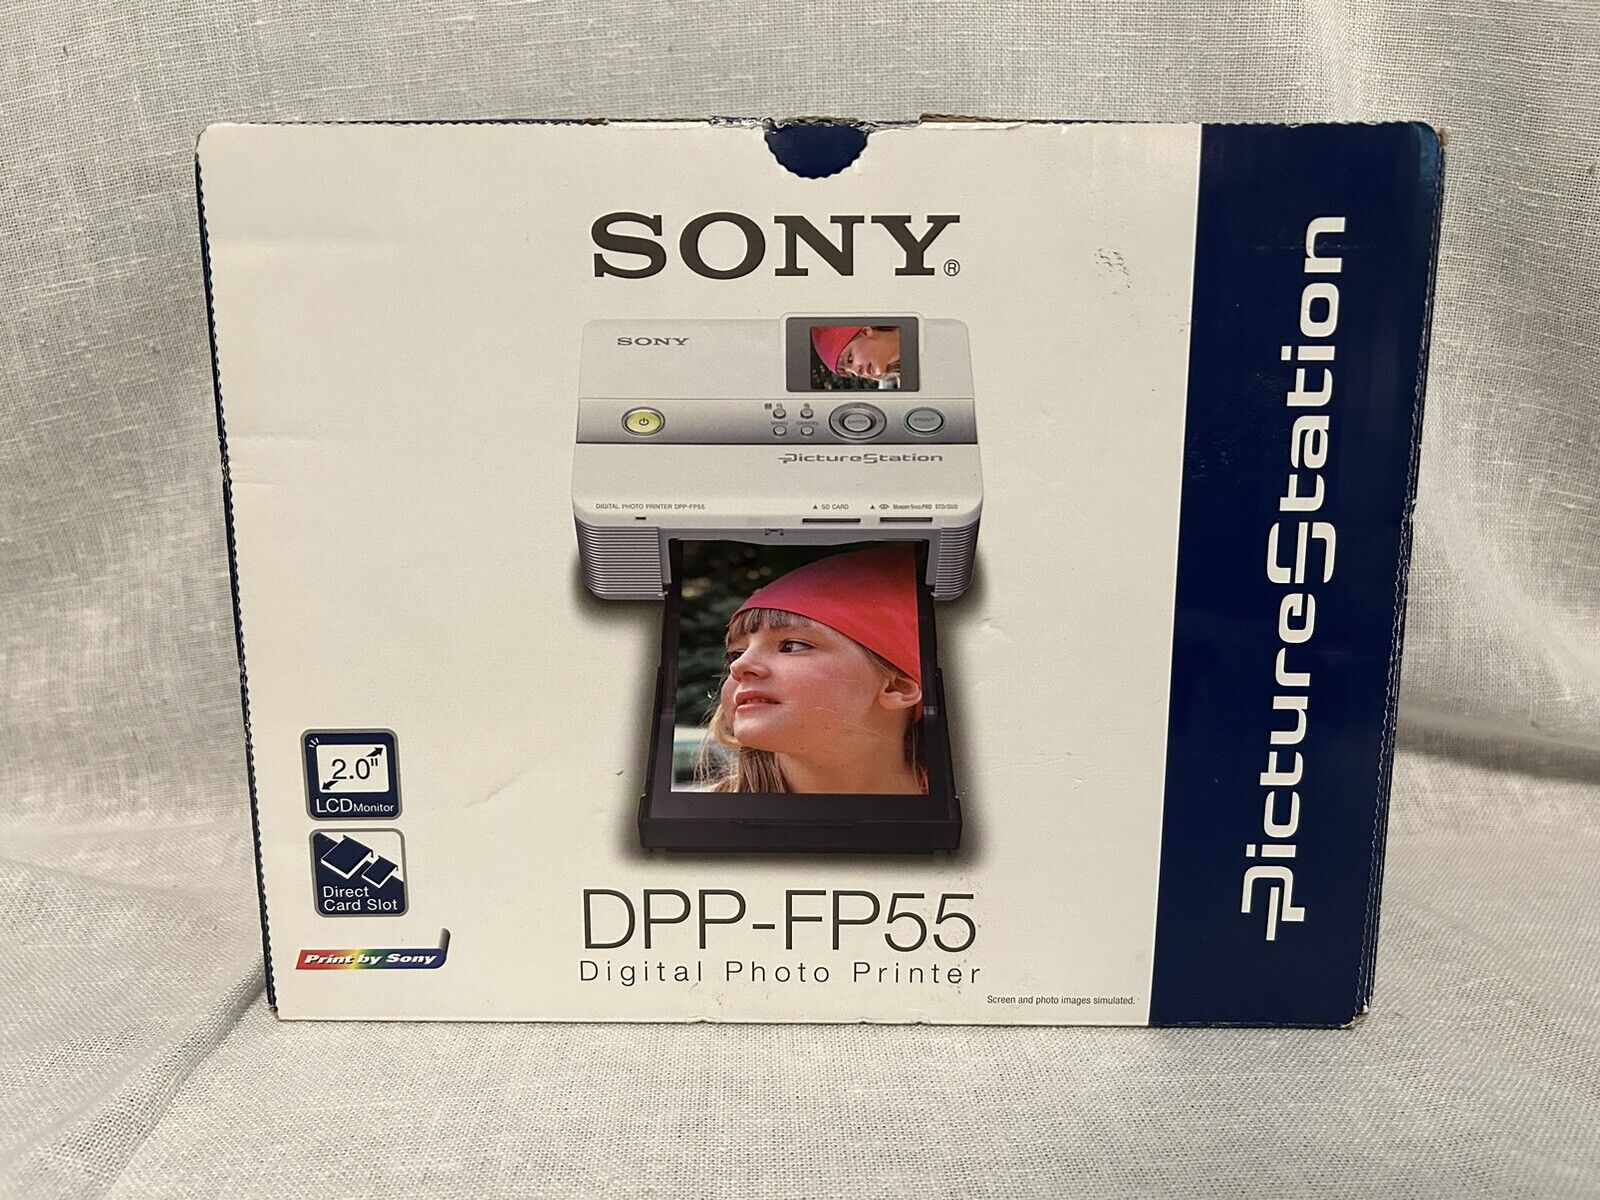 Sony DPP-FP55 Picture Station - Digital Photo Color Printer with LCD Screen